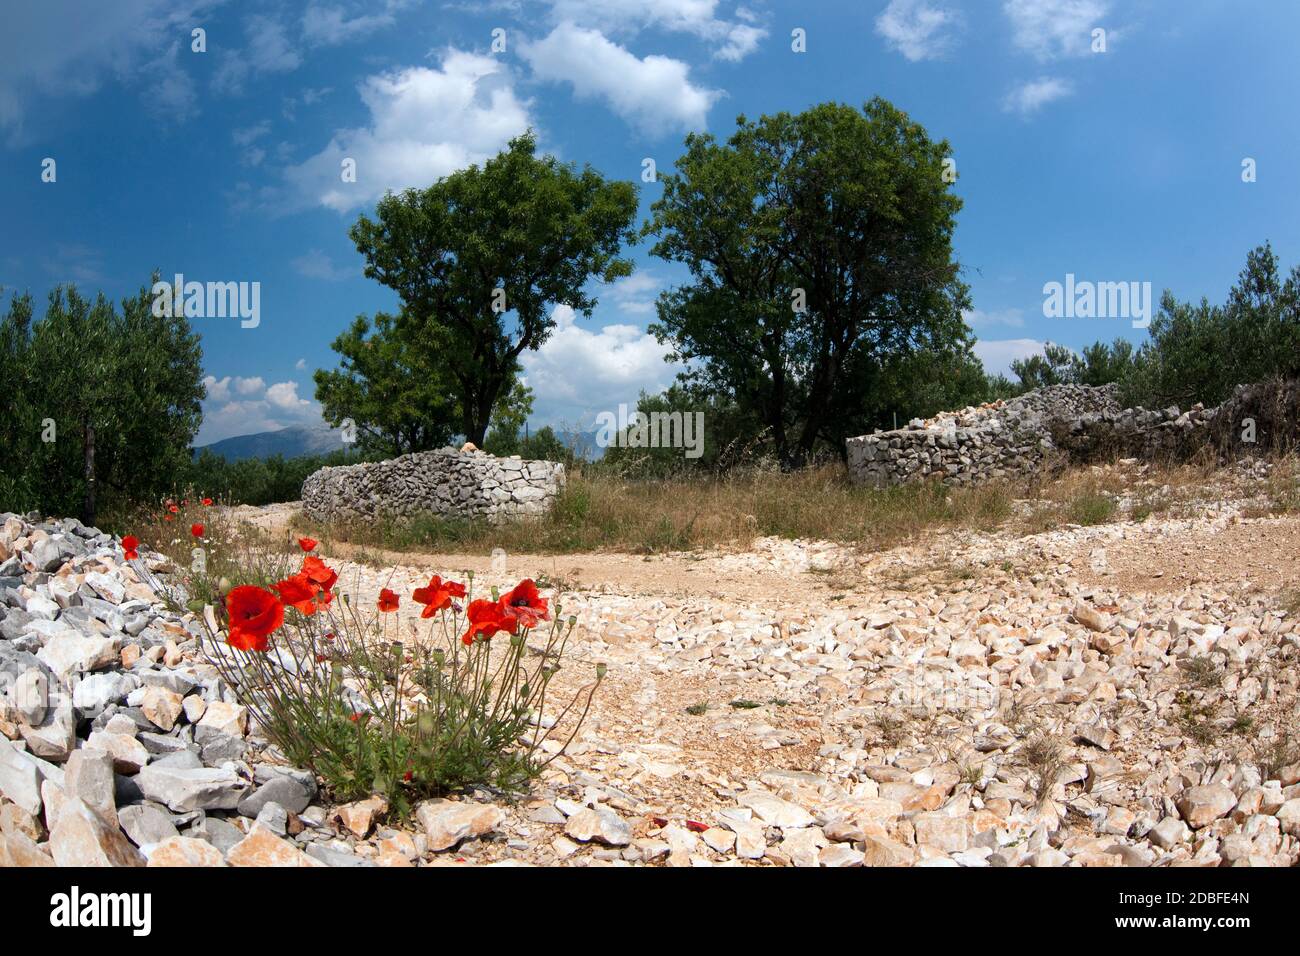 Poppies by the road lined with stone walls and trees, Croatia Stock Photo